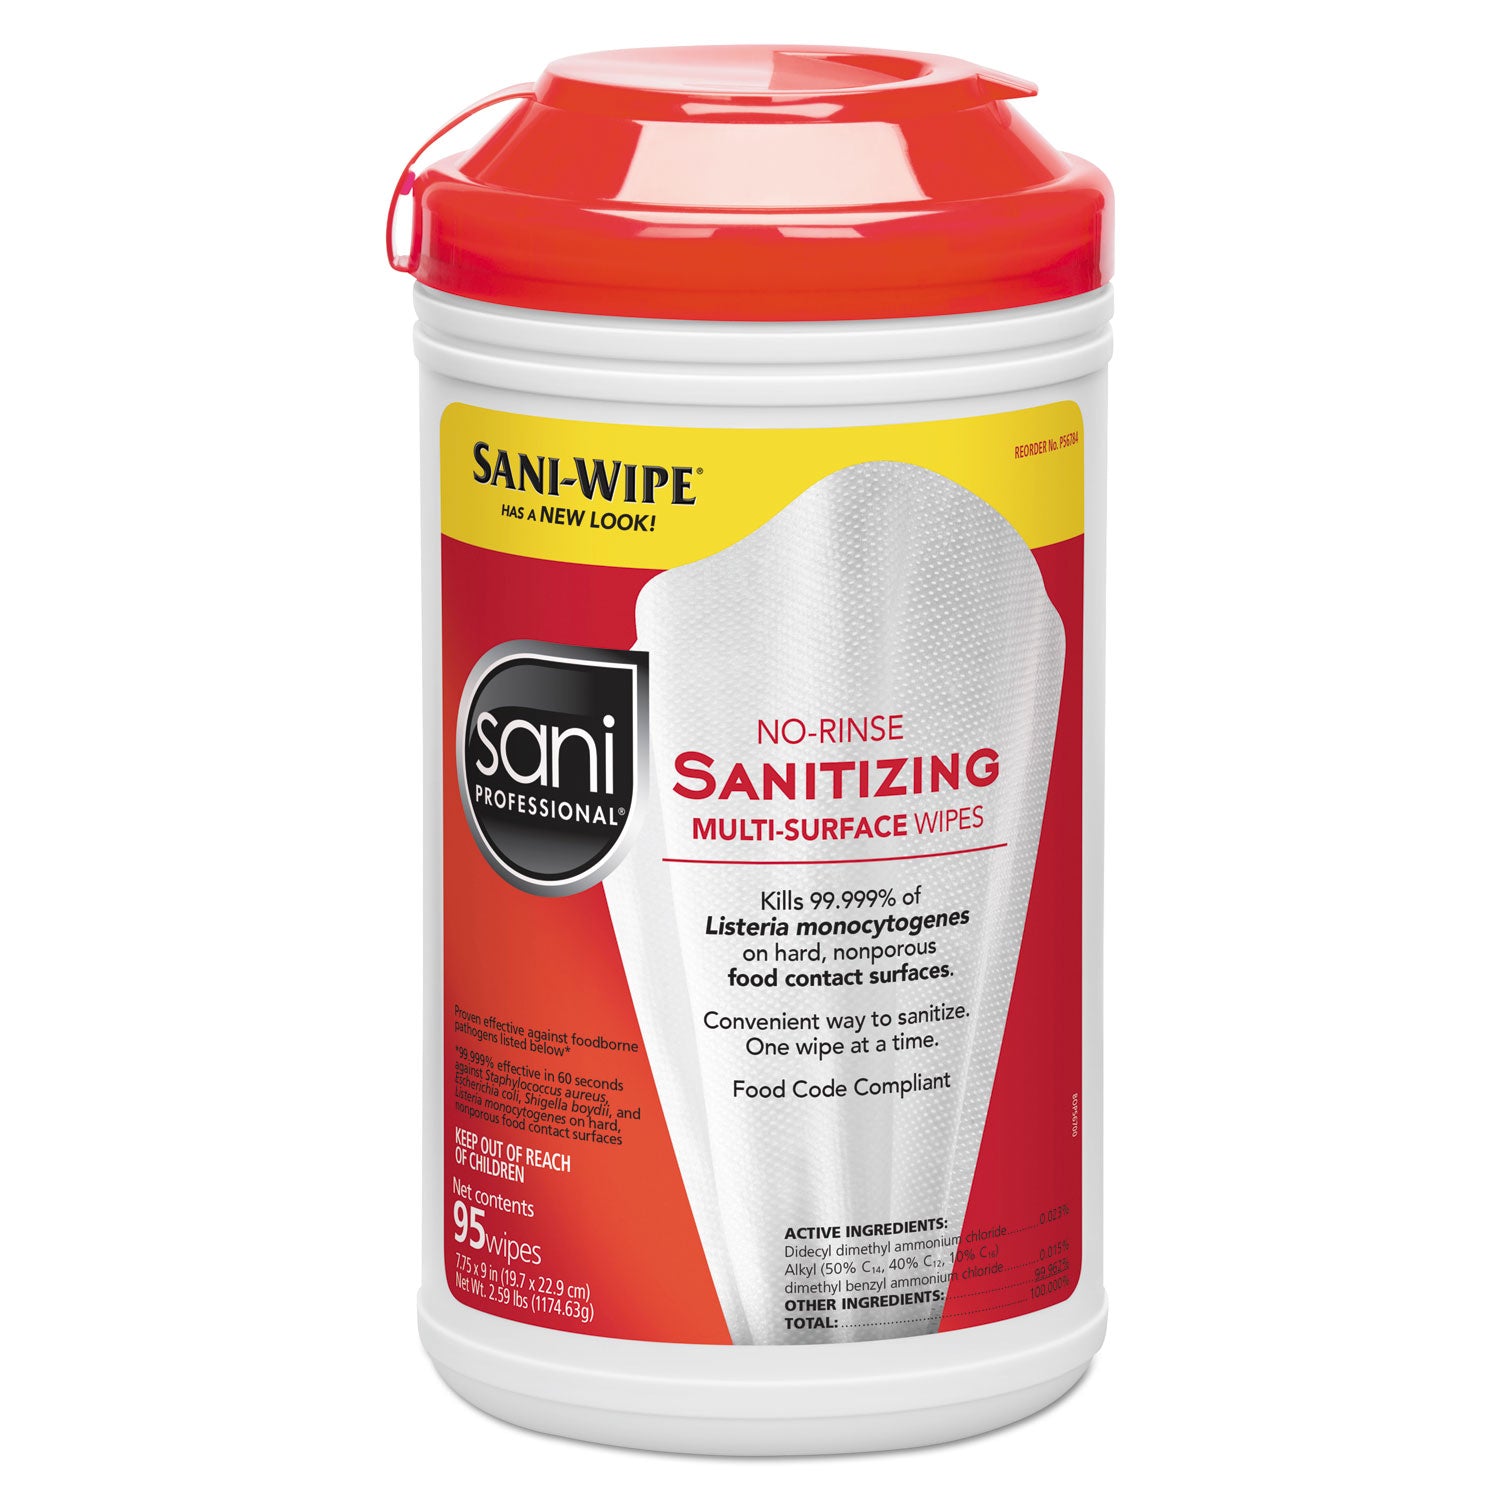 no-rinse-sanitizing-multi-surface-wipes-unscented-white-95-container-6-carton_nicp56784 - 2